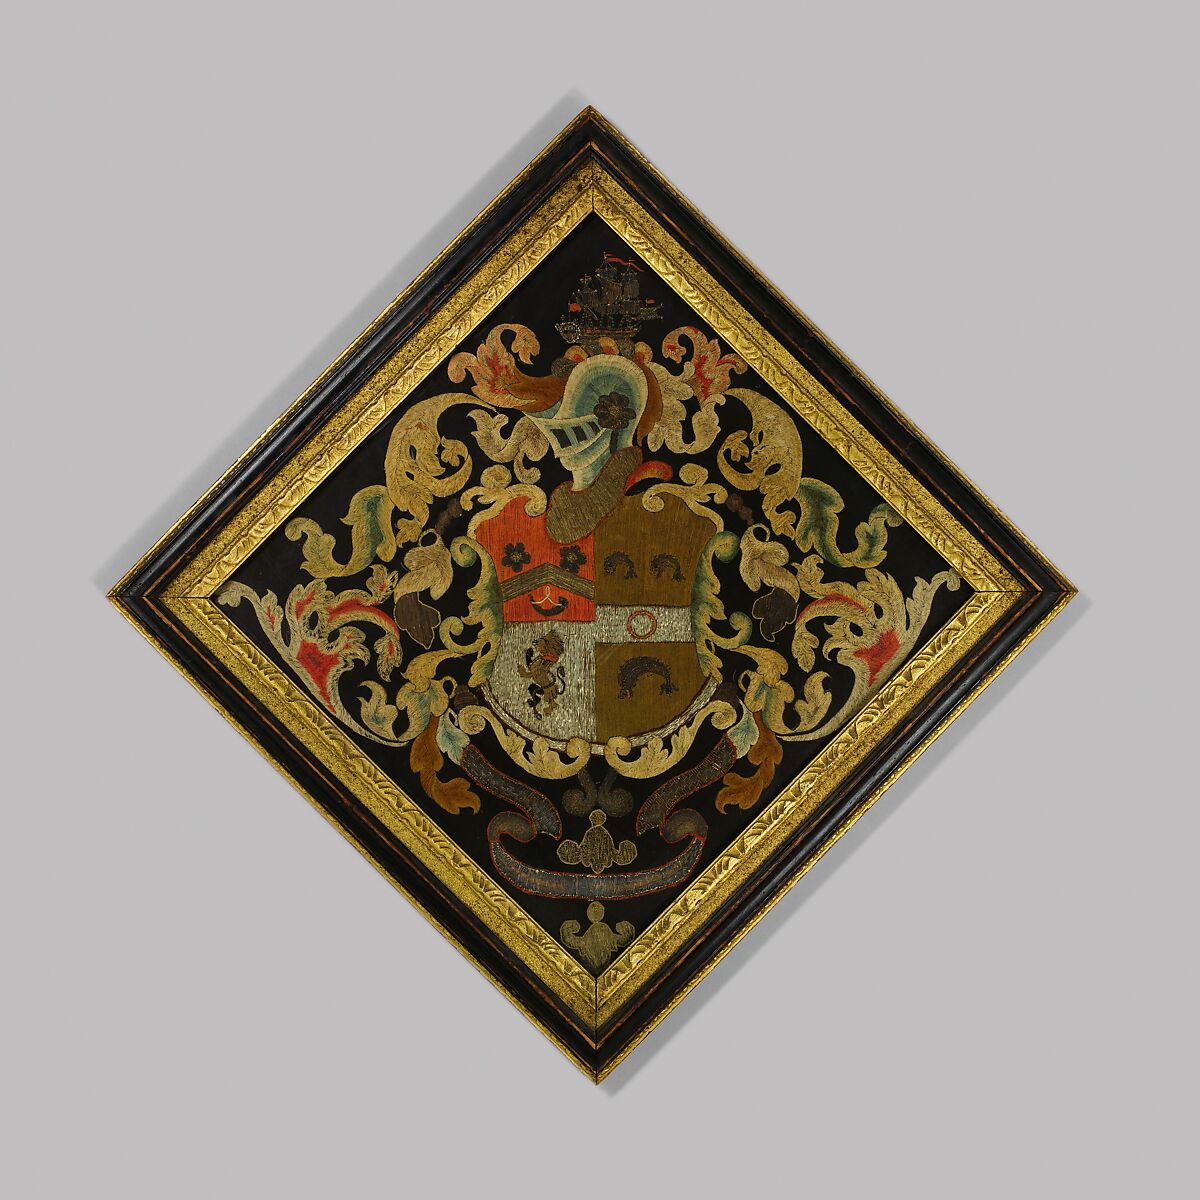 Duncan Family Coat of Arms, Sarah Duncan (1775–1835), Silk and metallic thread embroidered on silk ground, American 